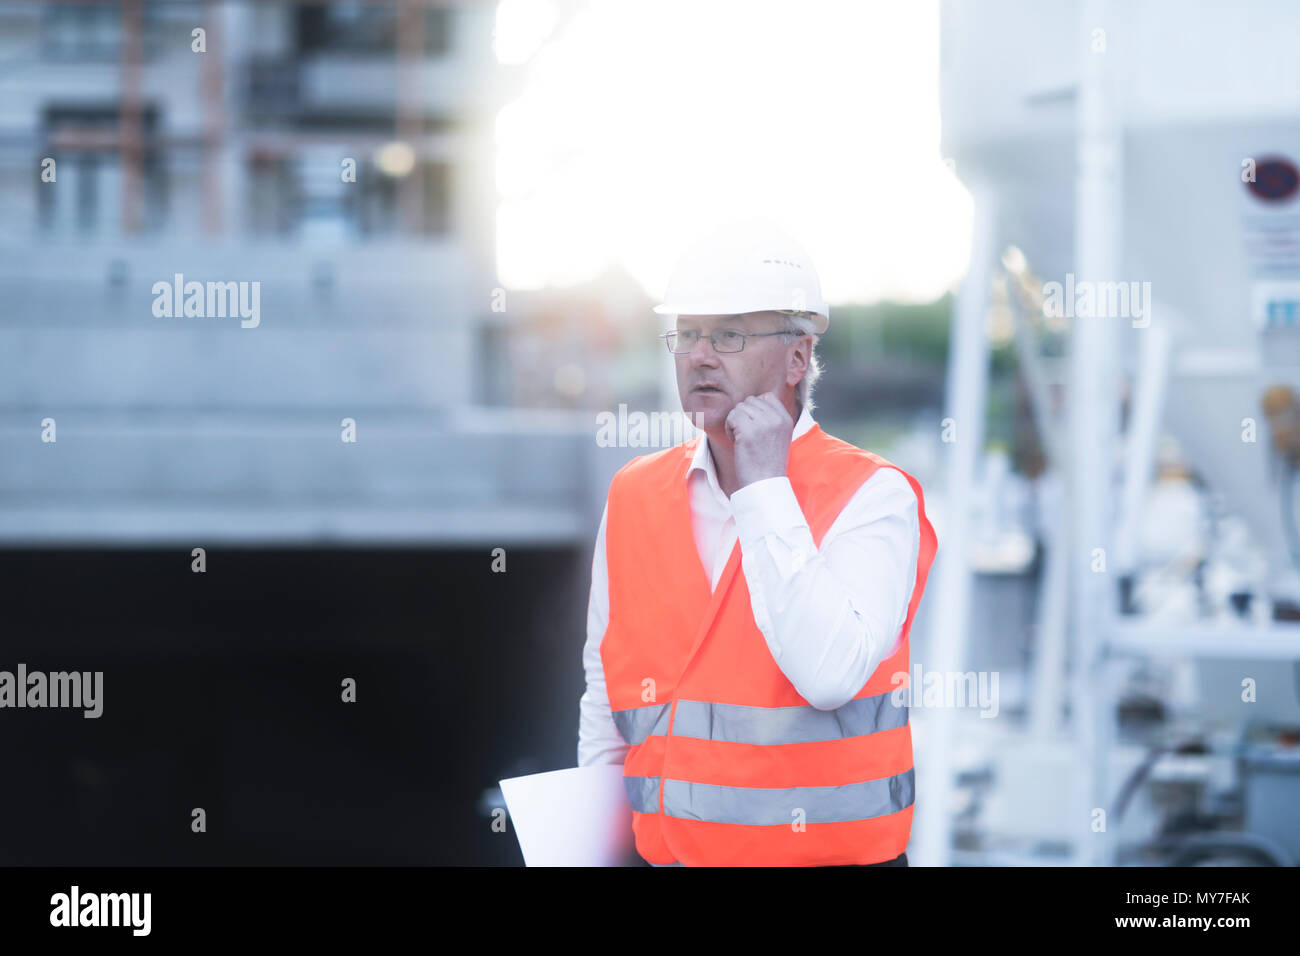 Construction worker on site Stock Photo